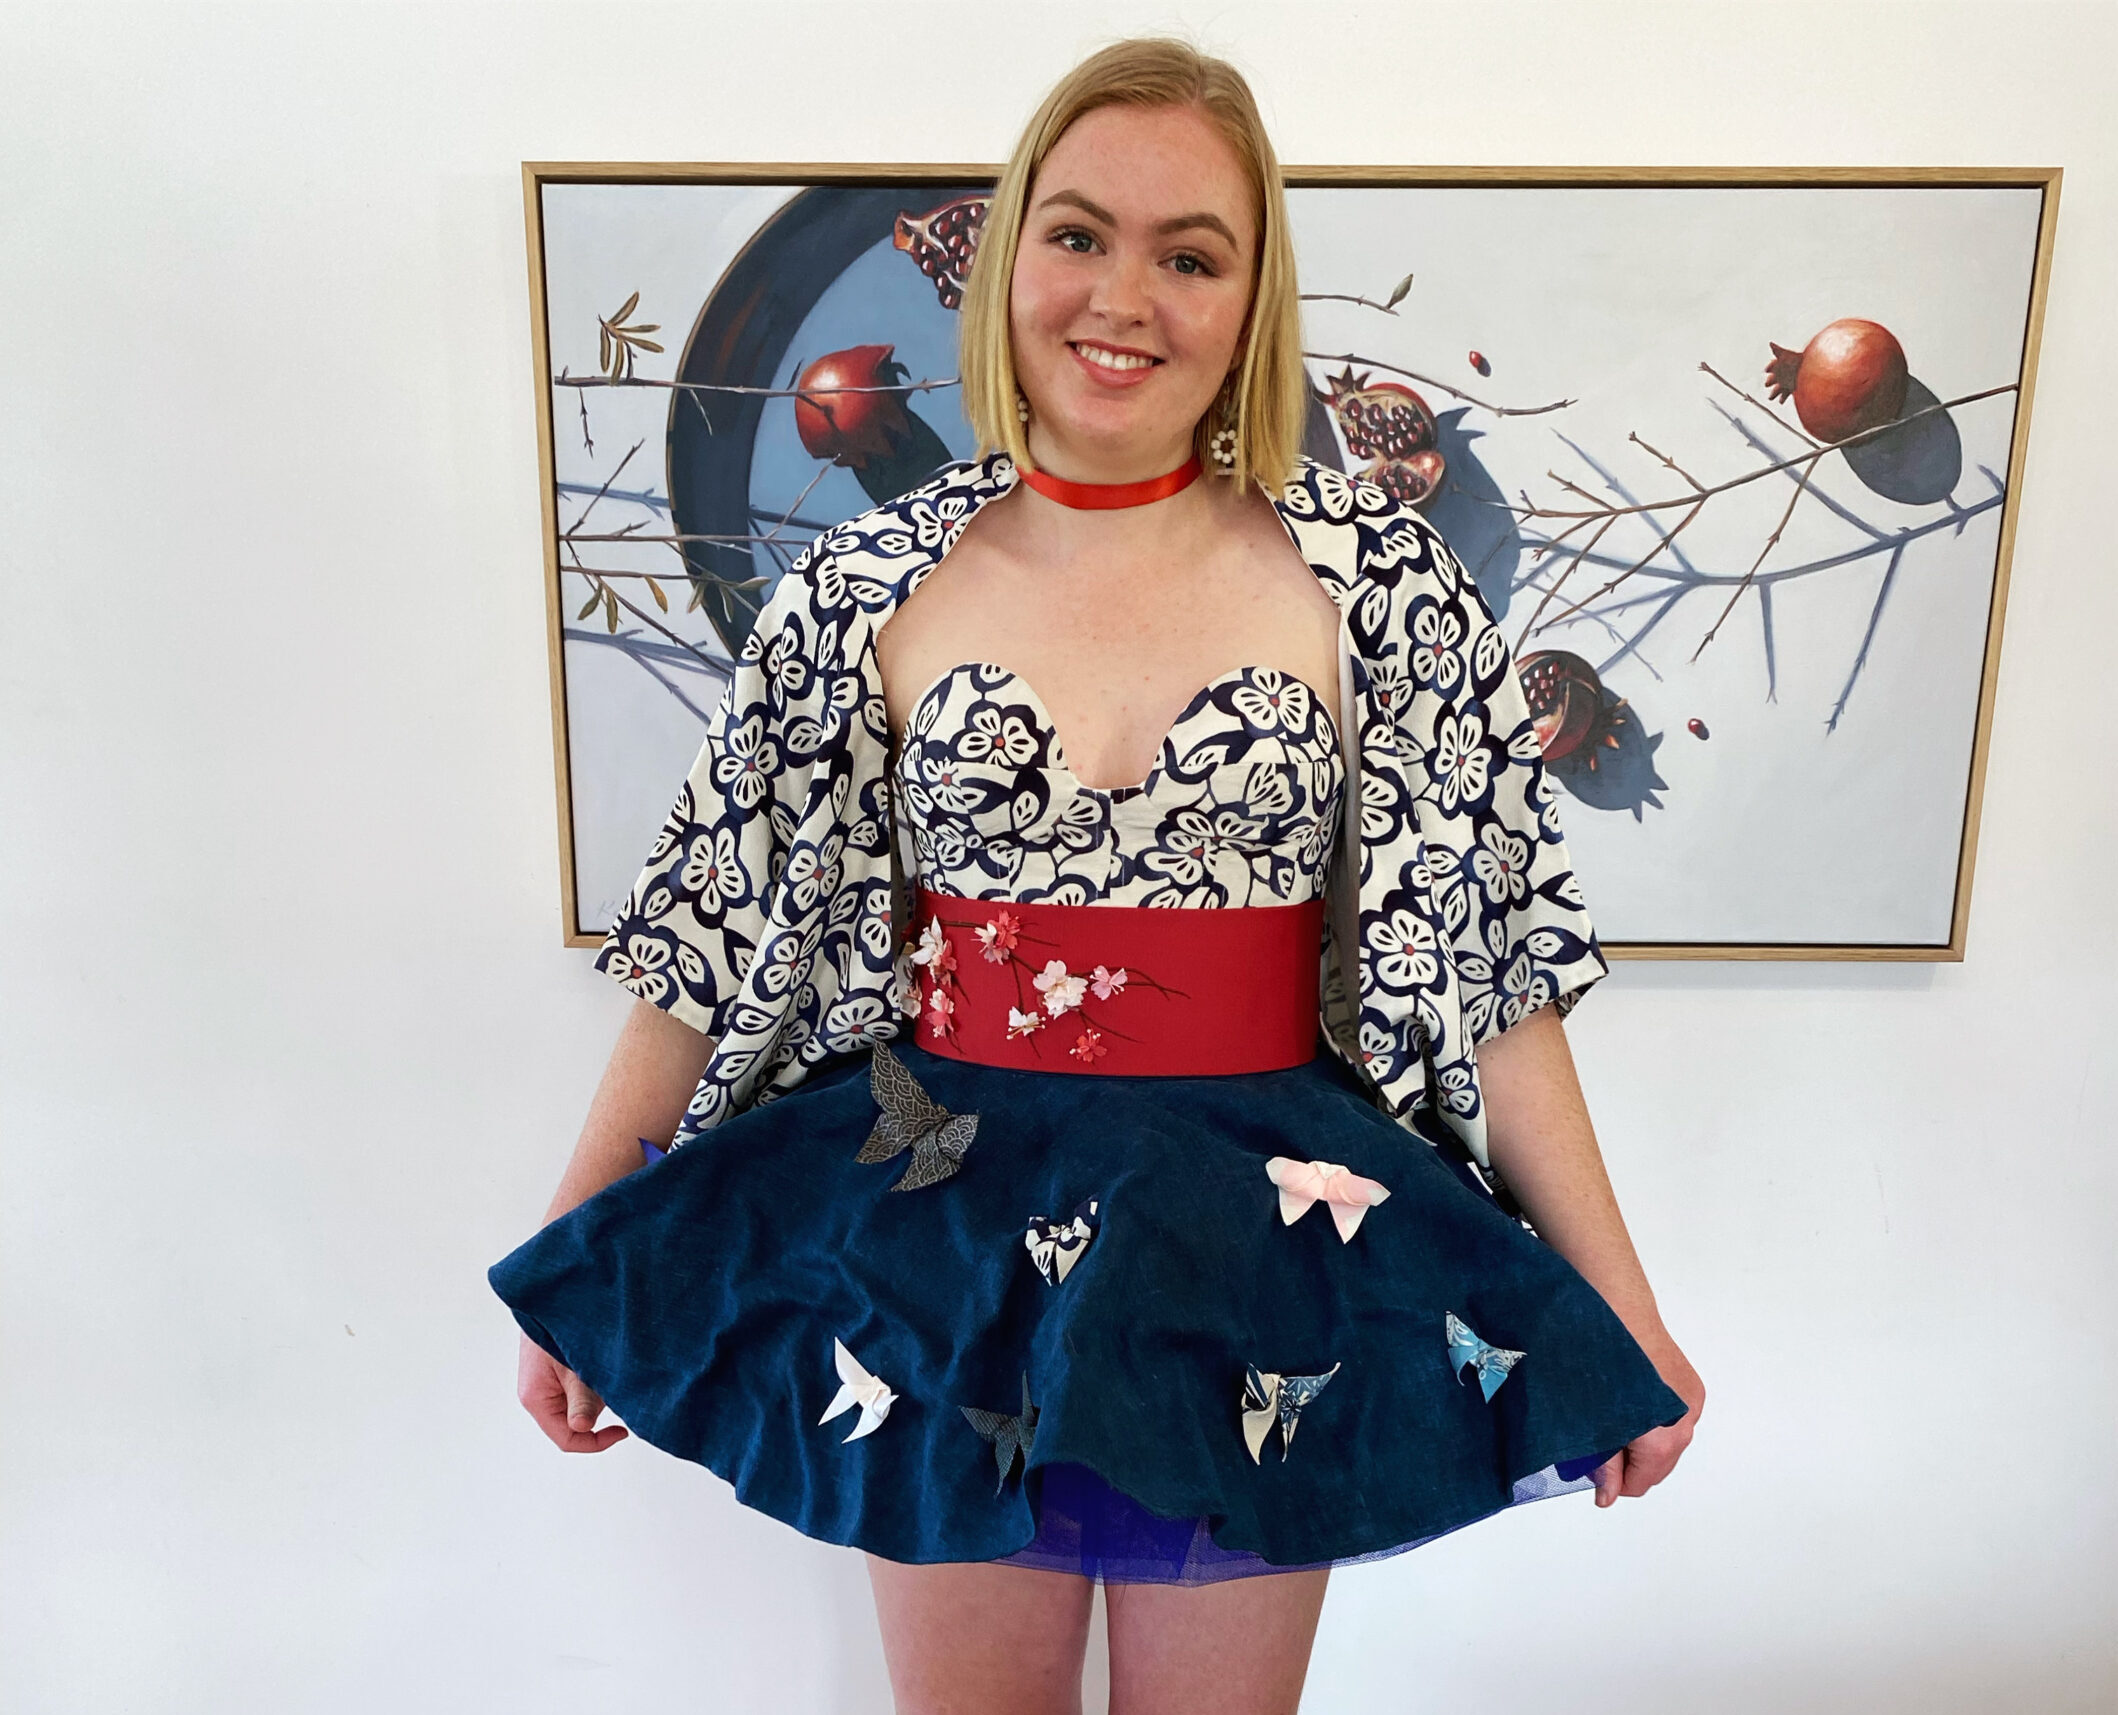 Budding designer Poppy Smith to be featured at NSW TEXStyle exhibition